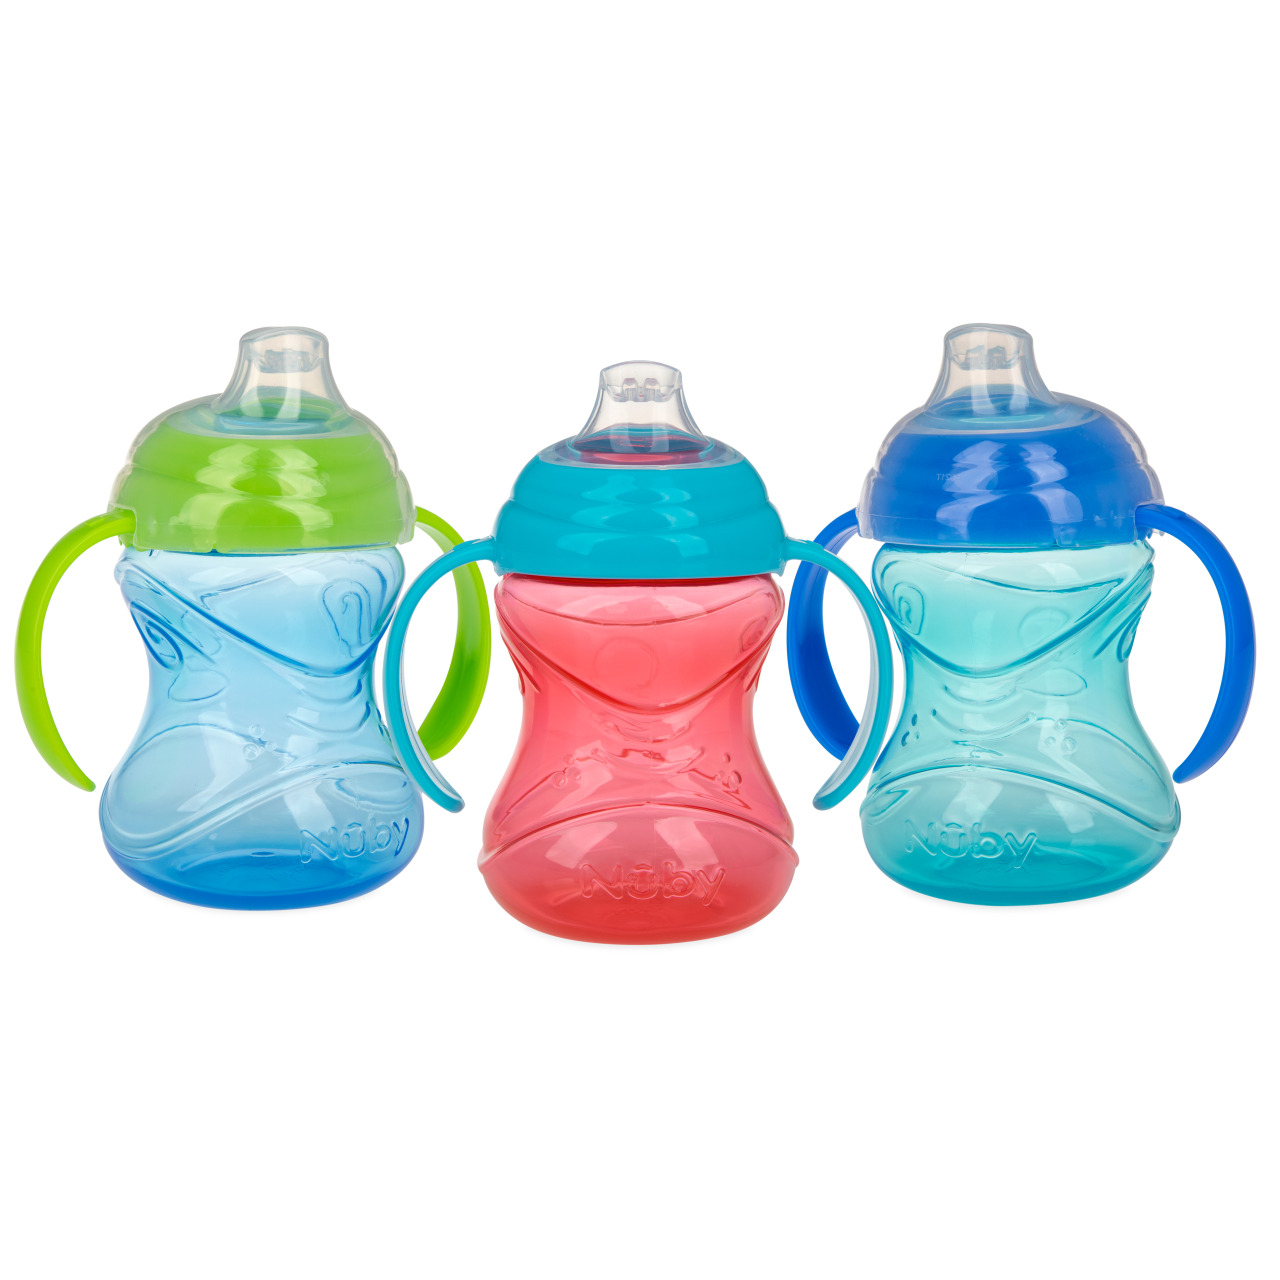 Nuby Sili Band Soft Spout Cup Each